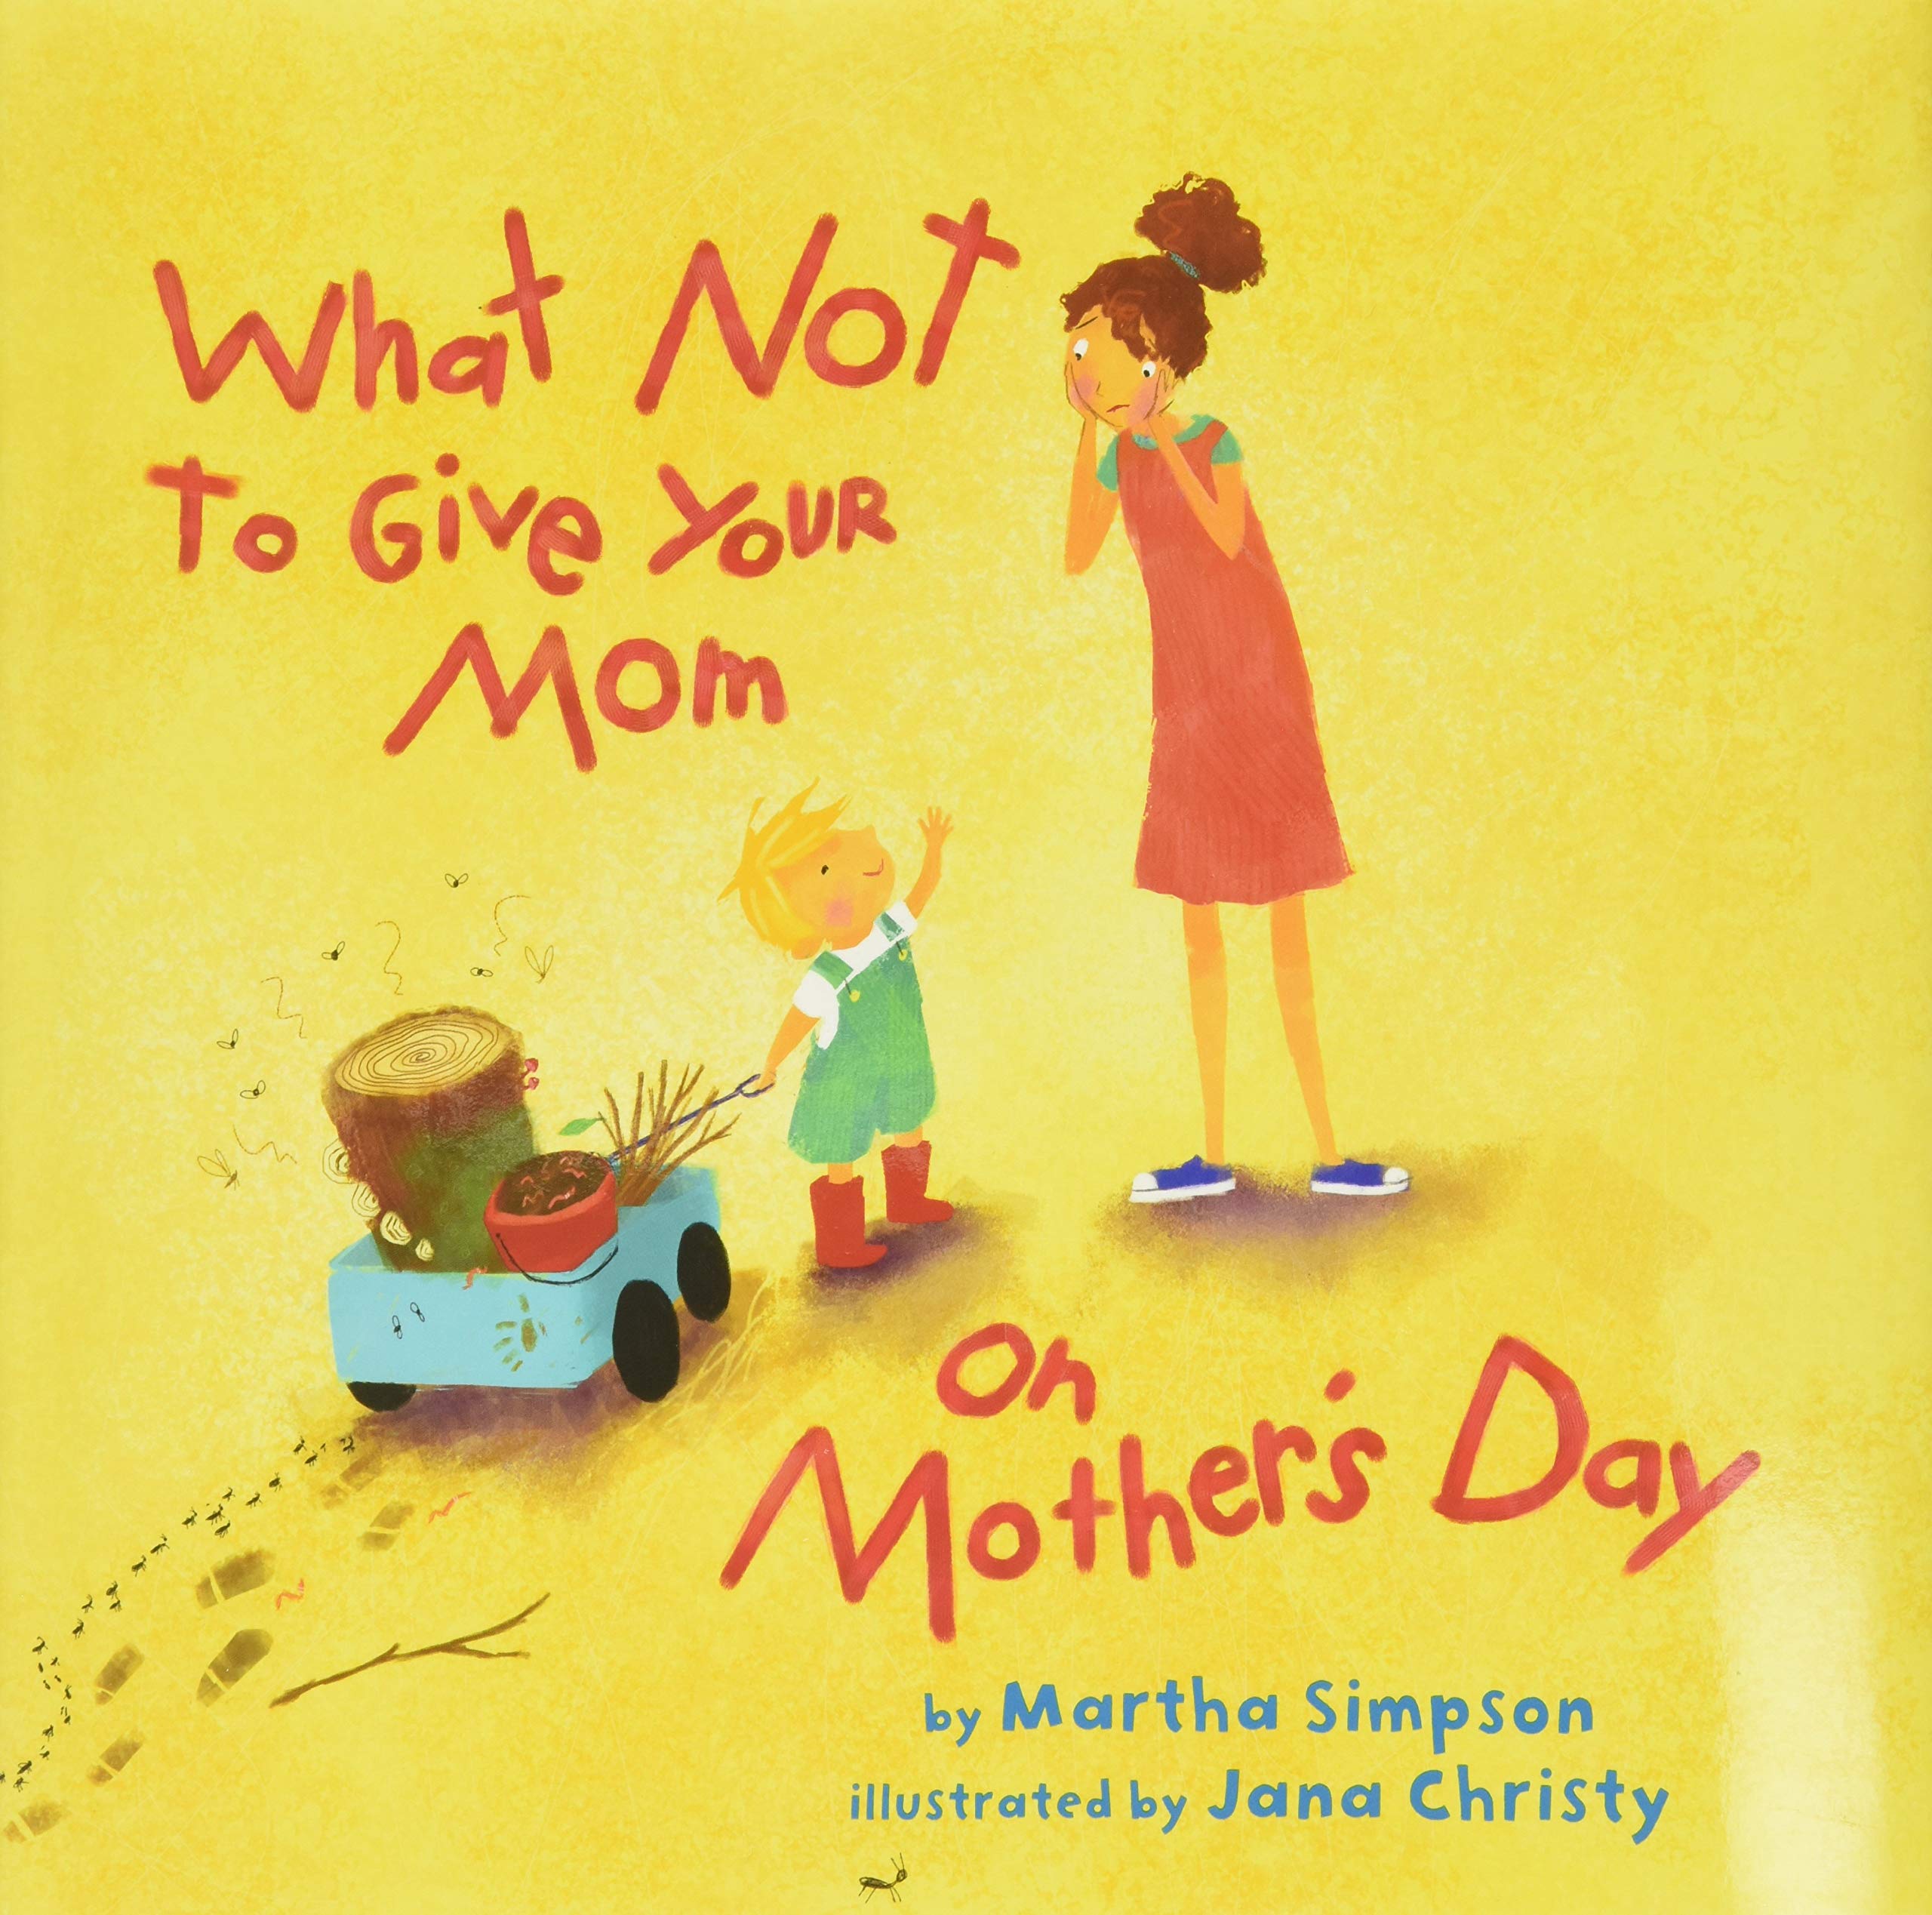 What NOT to Give Your Mom on Mother's Day